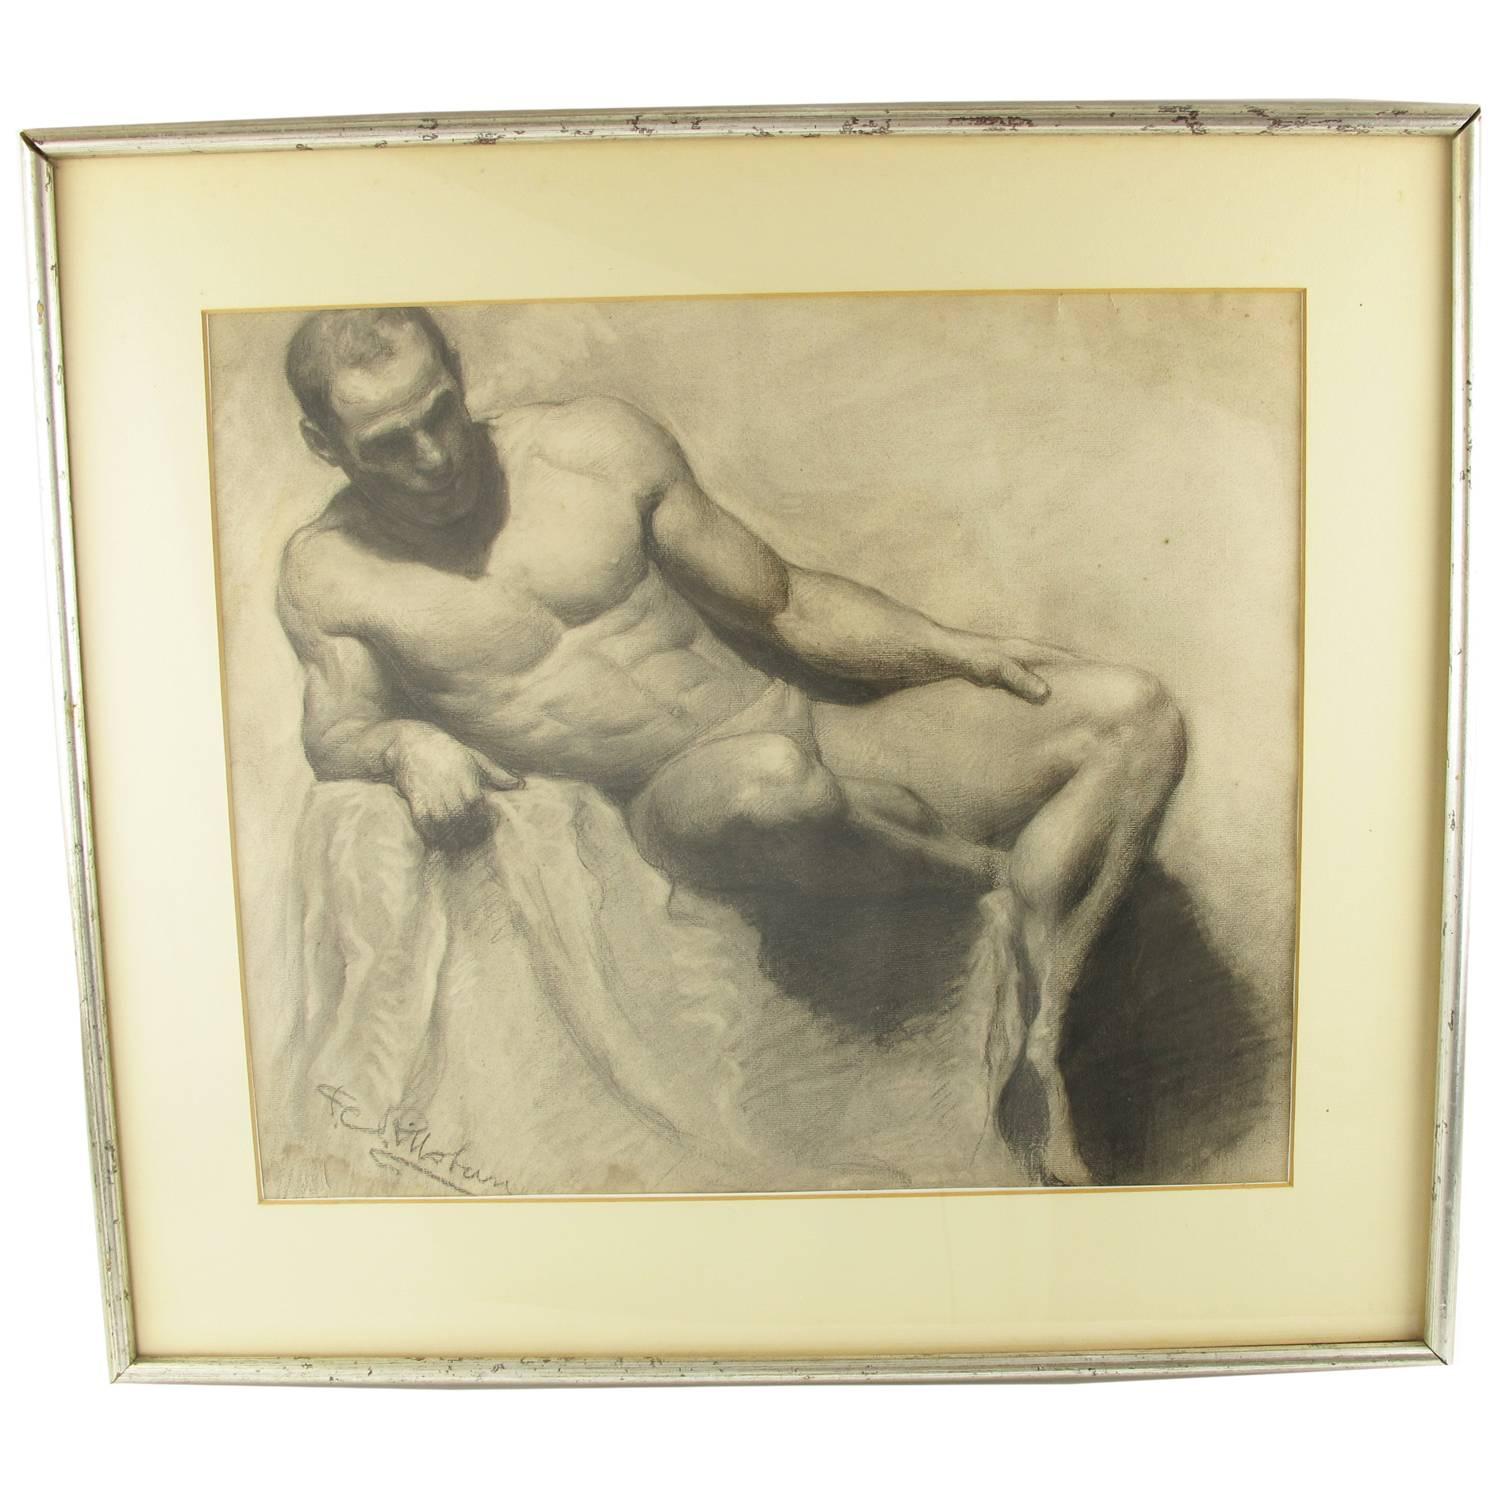 Seated Man, Nude Study Charcoal Drawing, Signed